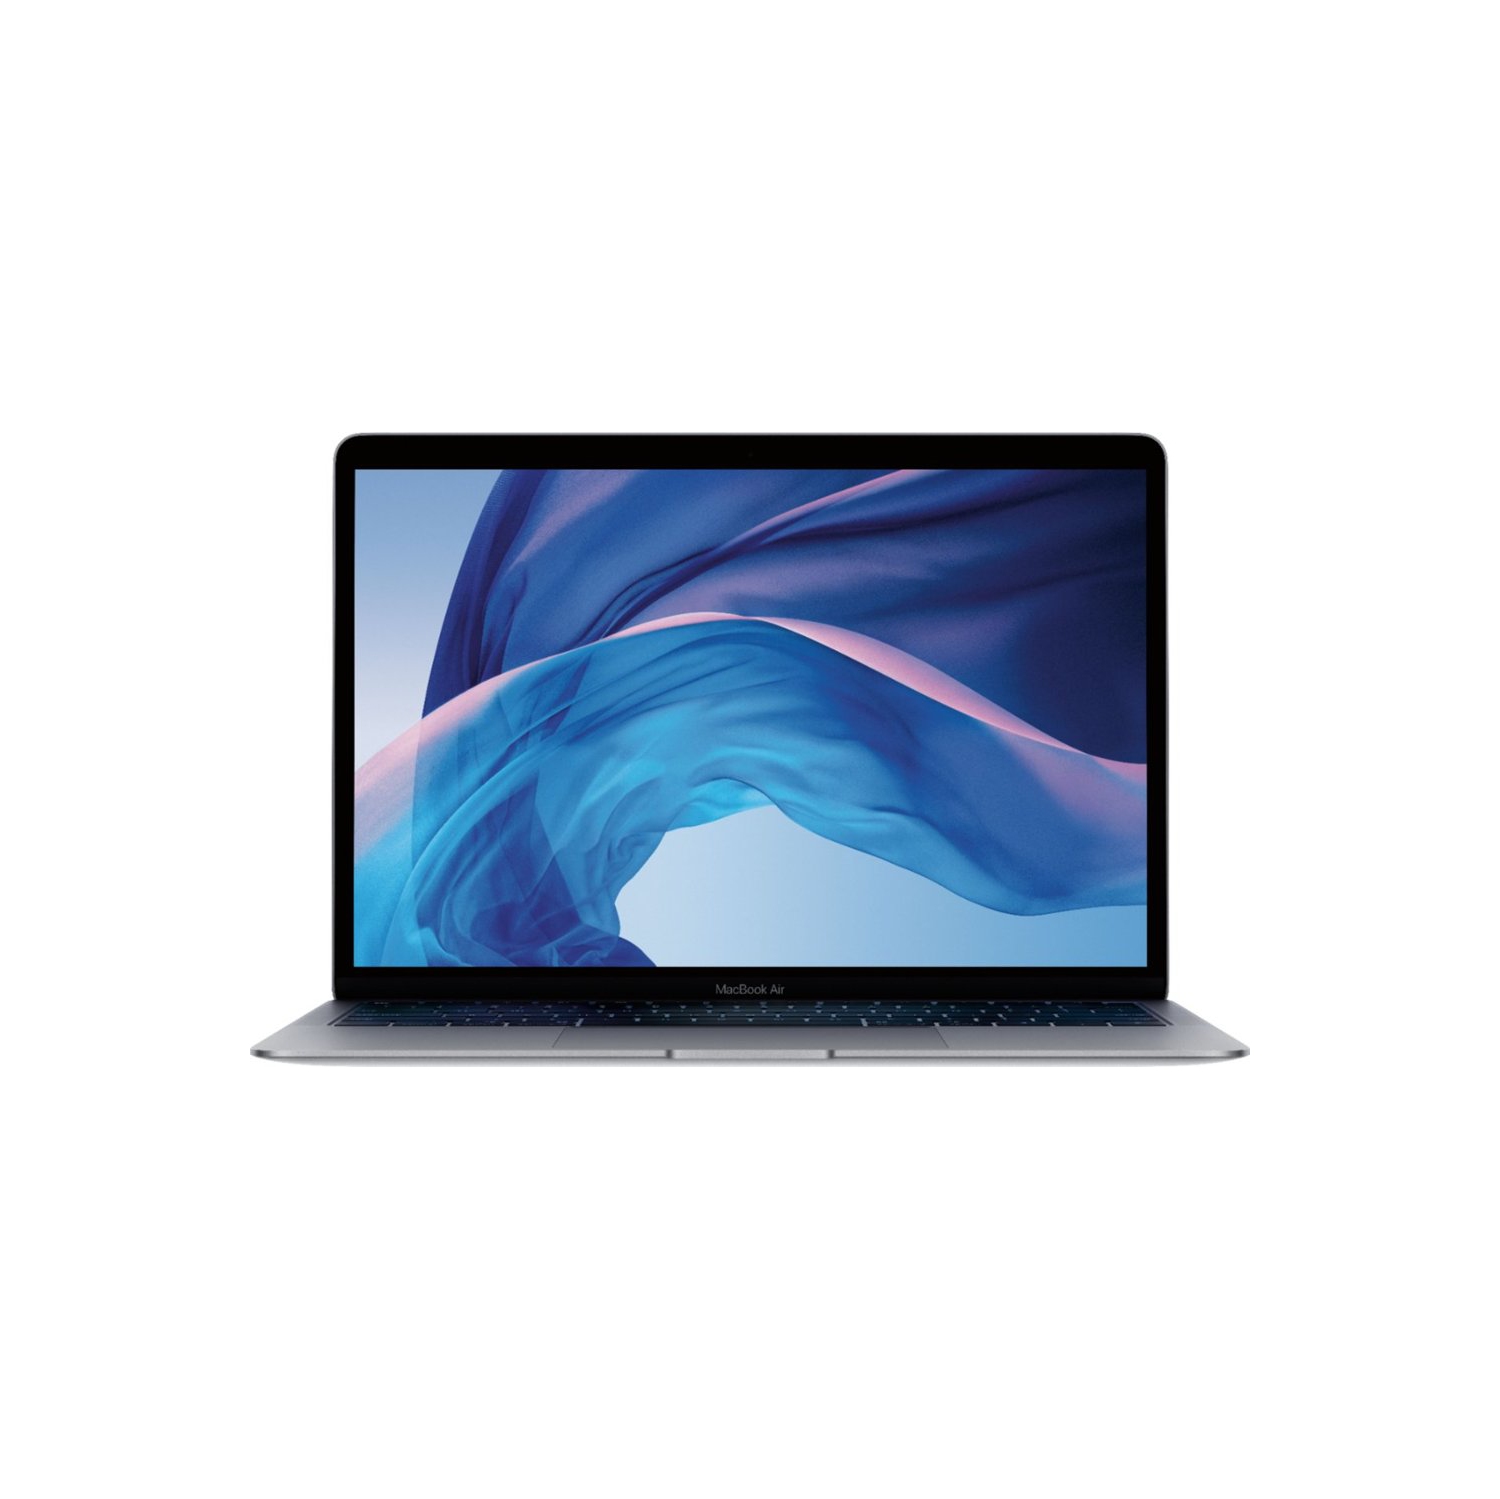 Refurbished (Excellent) - Apple MacBook Air A1932 (MRE82LL/A) 13.3" Notebook Space Gray Intel Core i5 1.60GHz 8GB RAM 128GB SSD (Late 2018)